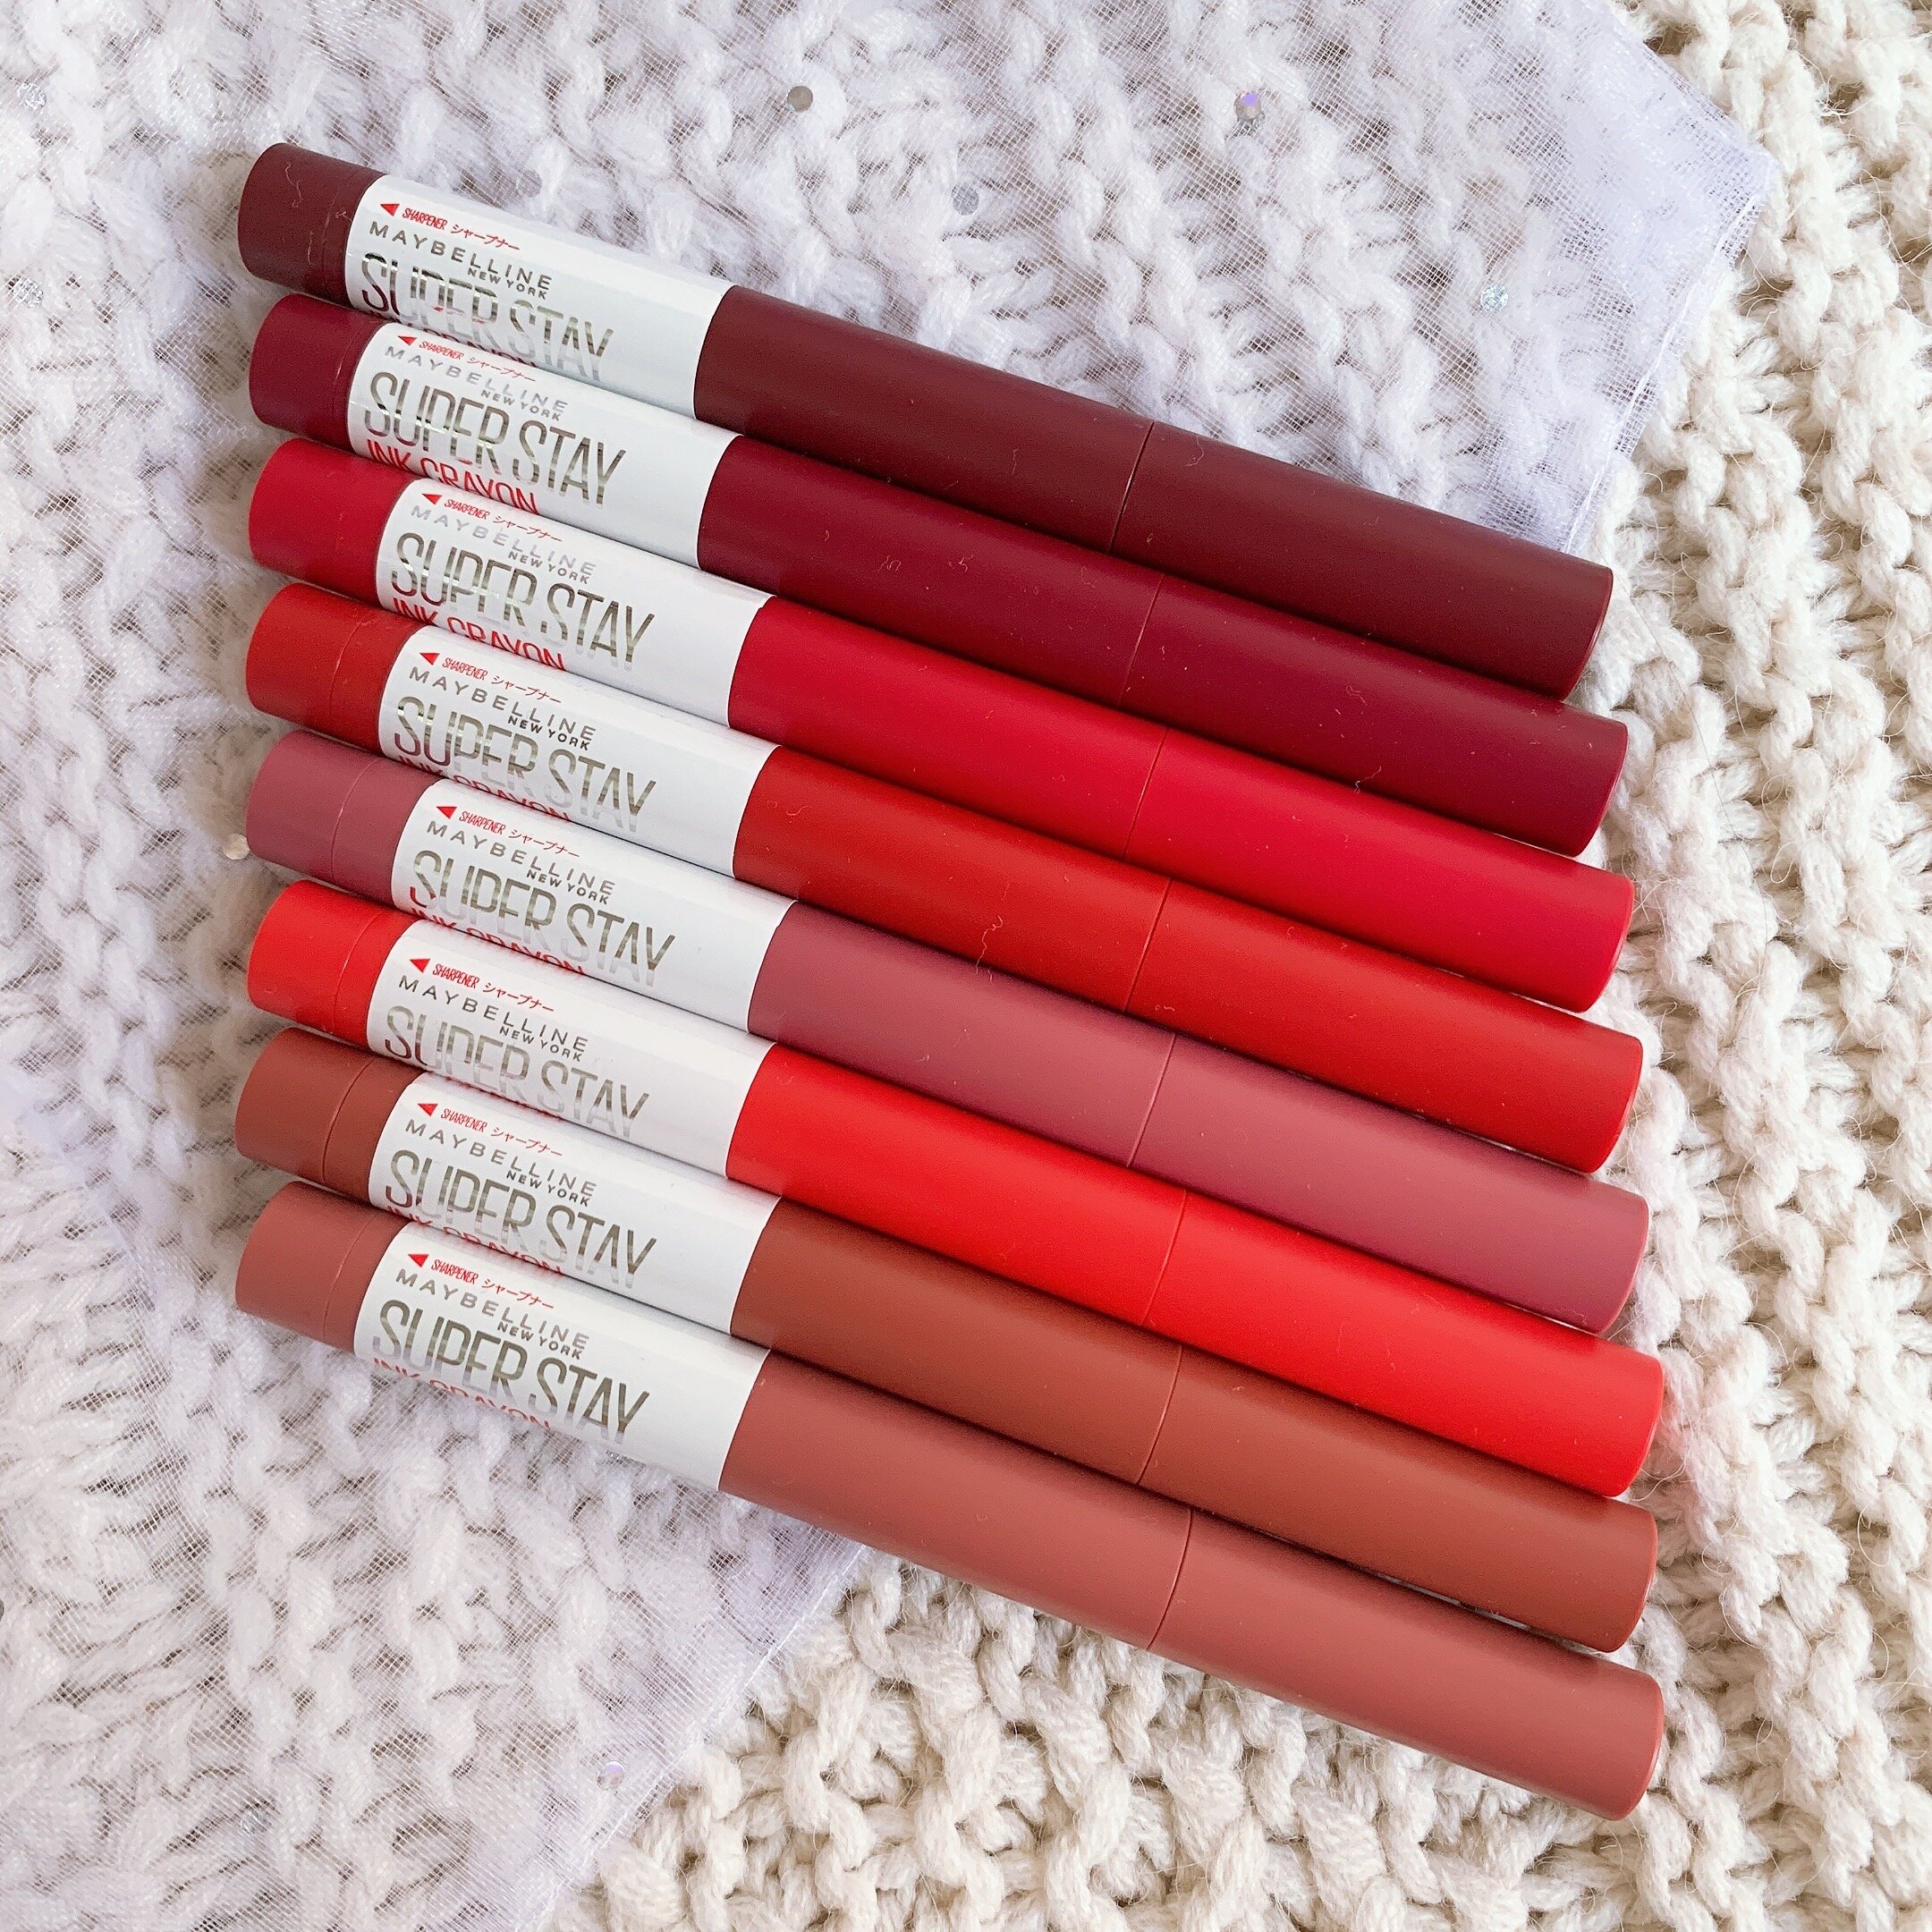 Maybelline Super Stay Ink Crayon / Maybelline X Ashley Longshore Maybelline  Super Stay Matte Ink Swatches/Review — Beautypeadia